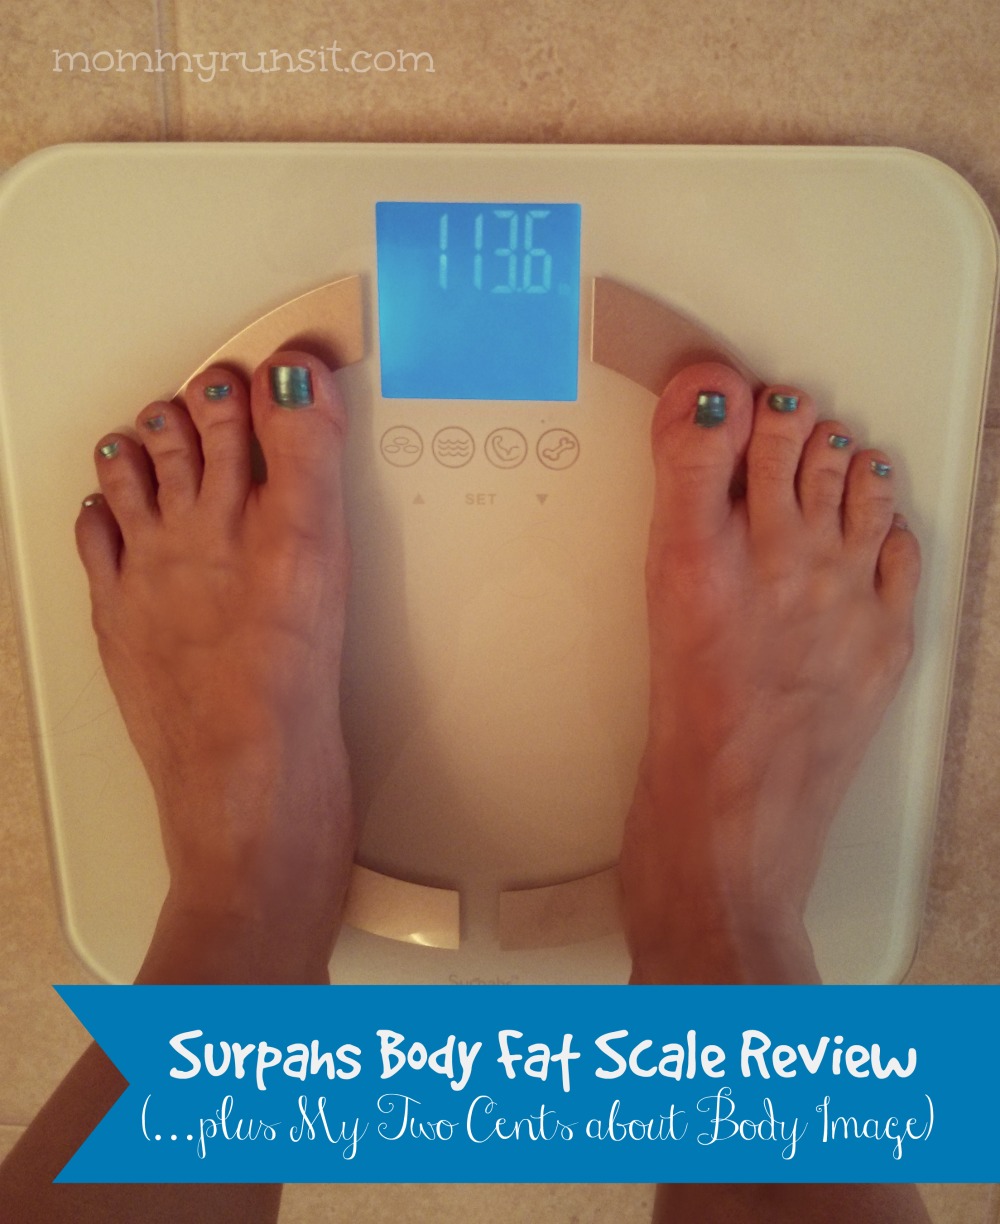 Surpahs Body Fat Scale Review (…plus My Two Cents about Body Image) | Mommy Runs It